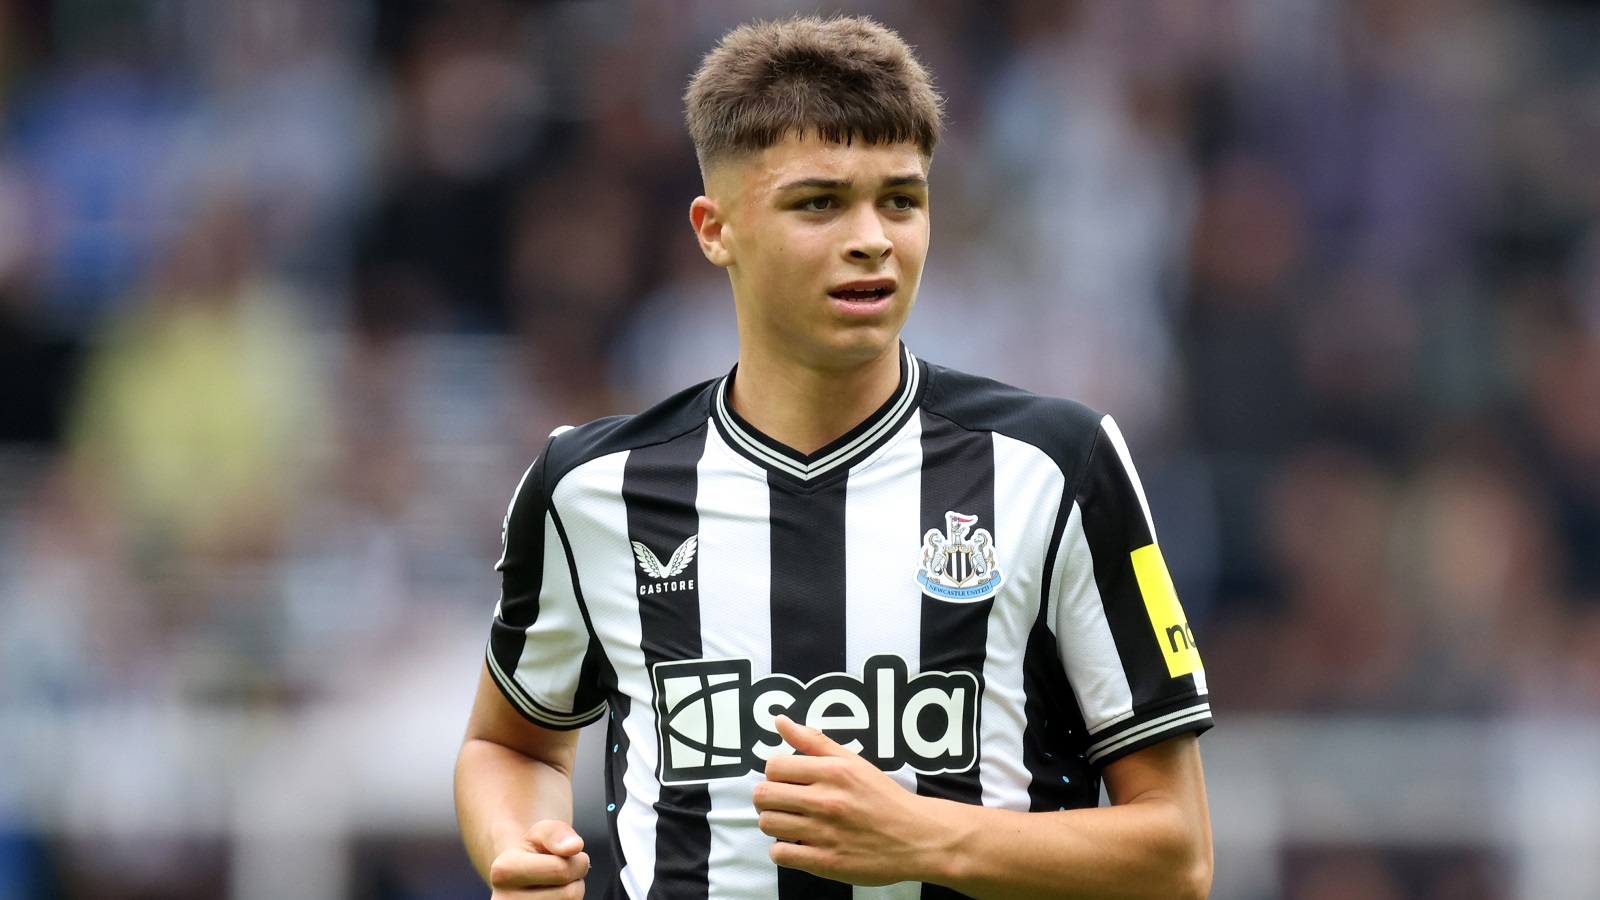 Newcastle United midfielder Lewis Miley returns to the club after suffering injury with England U20's.